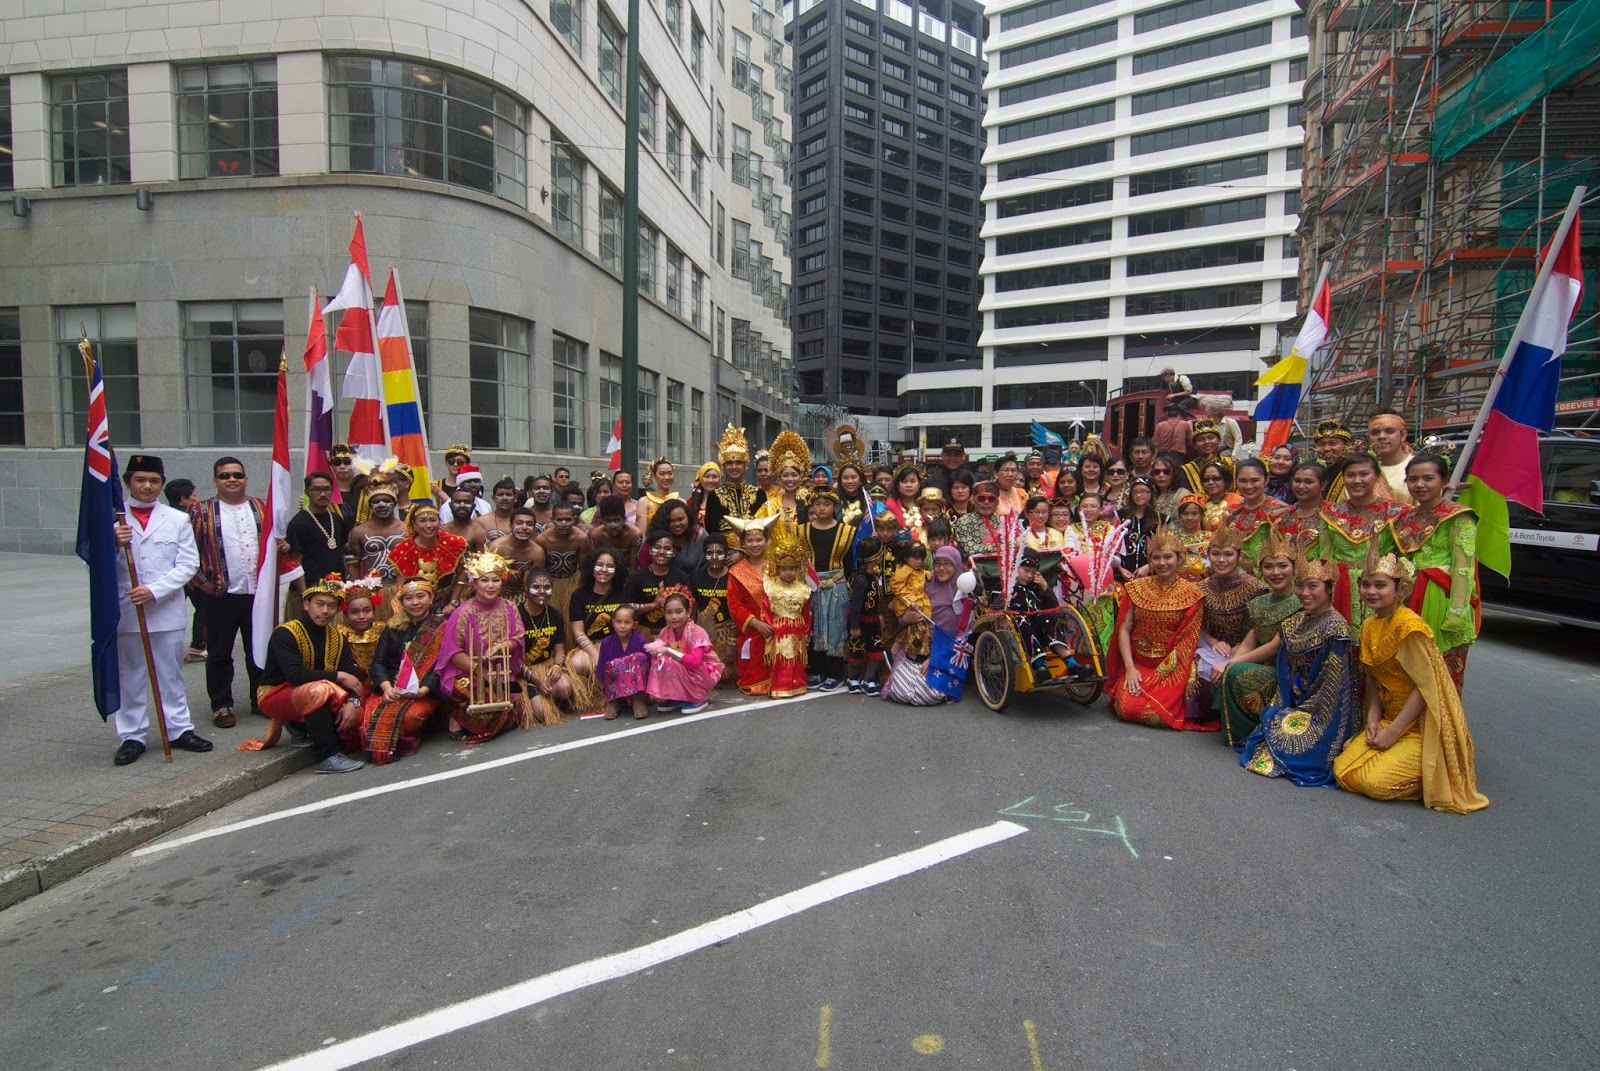 Indonesians in the NZ Parades: Thank you notes - The Amazing Indonesia